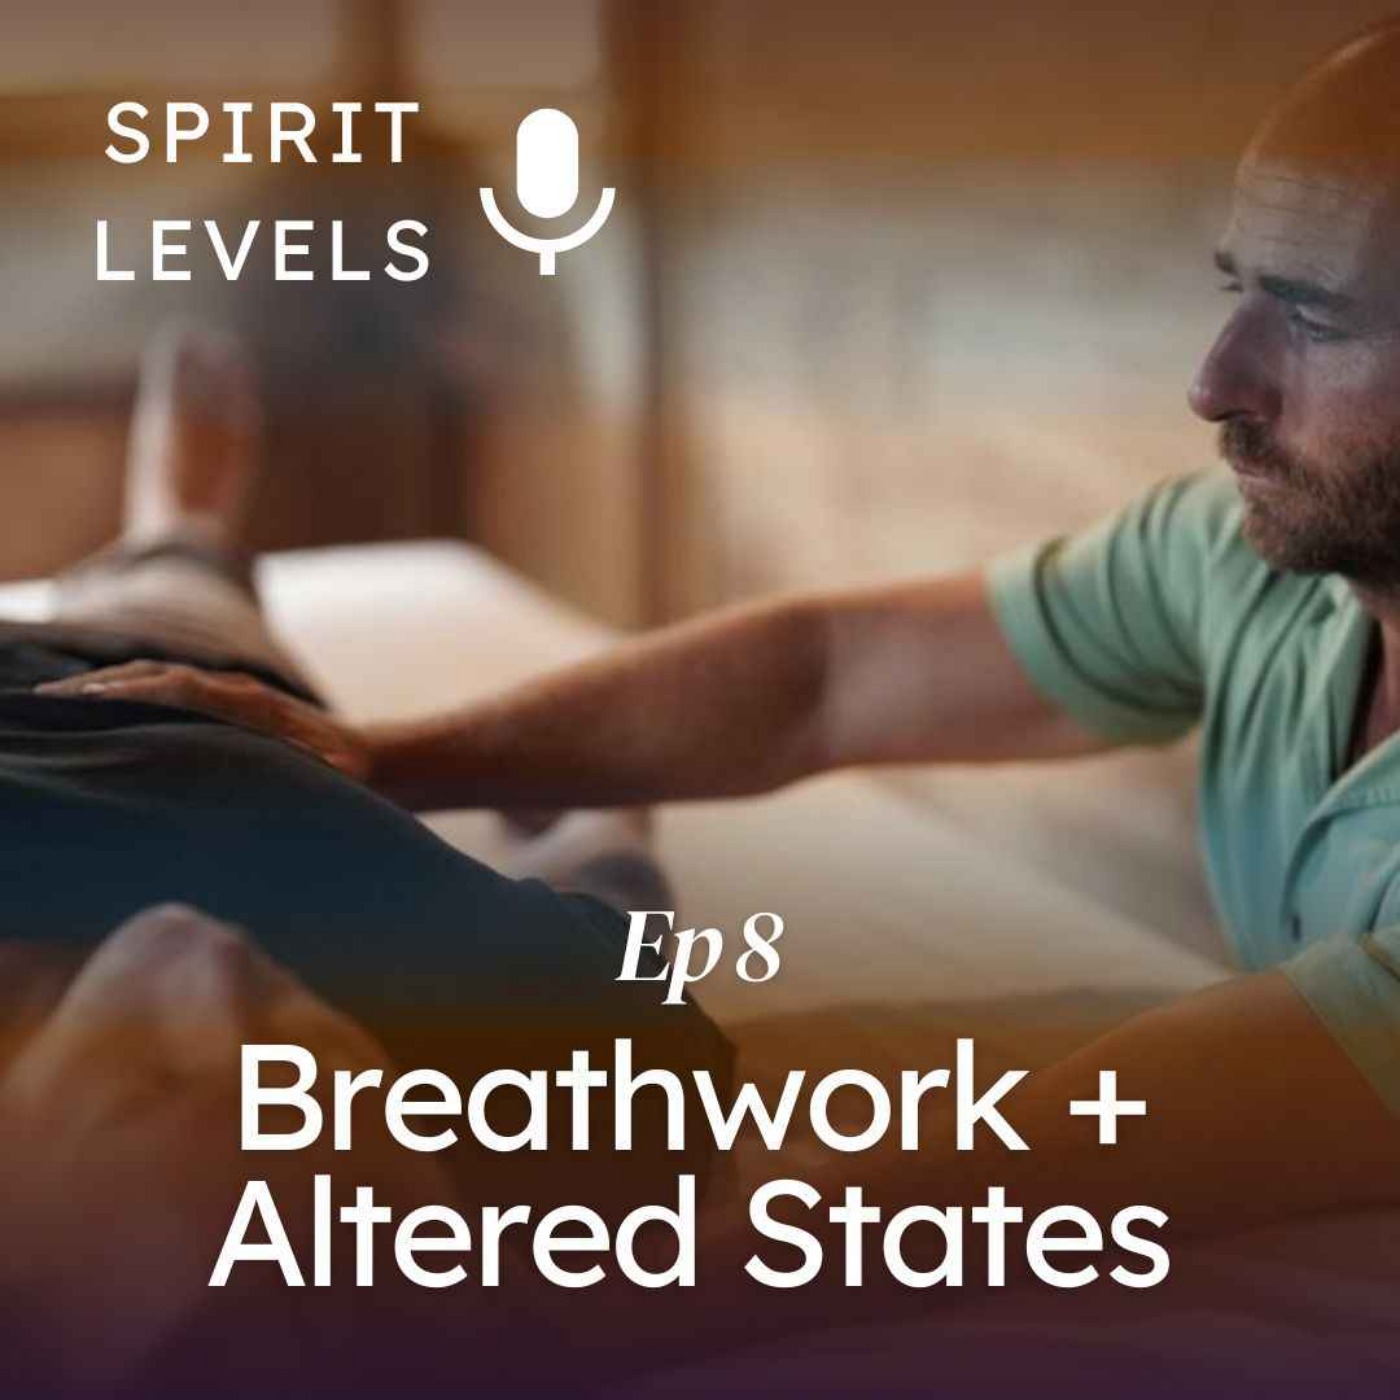 Breathwork and Altered States